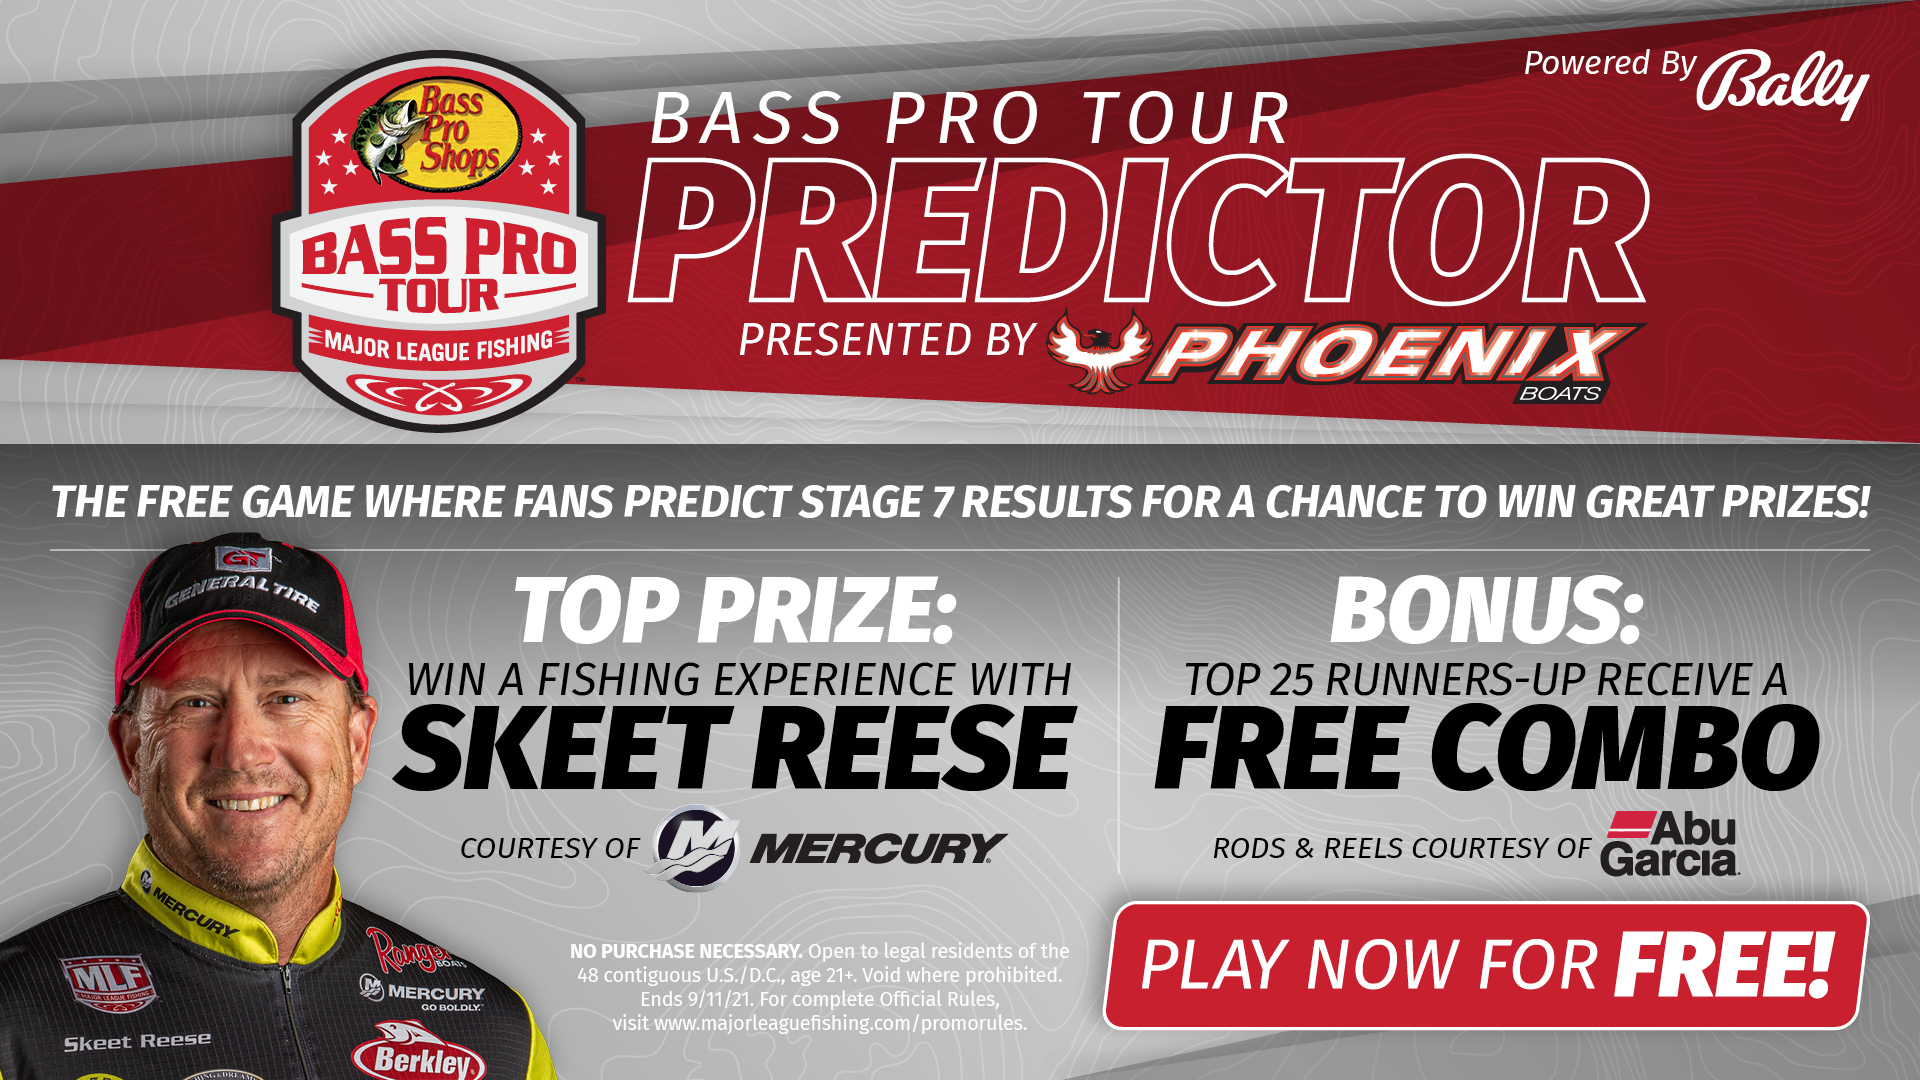 Major League Fishing Launches Free-to-Play Bass Pro Tour PREDICTOR Game  Presented by Phoenix to Win Fishing Trip with Skeet Reese - Major League  Fishing